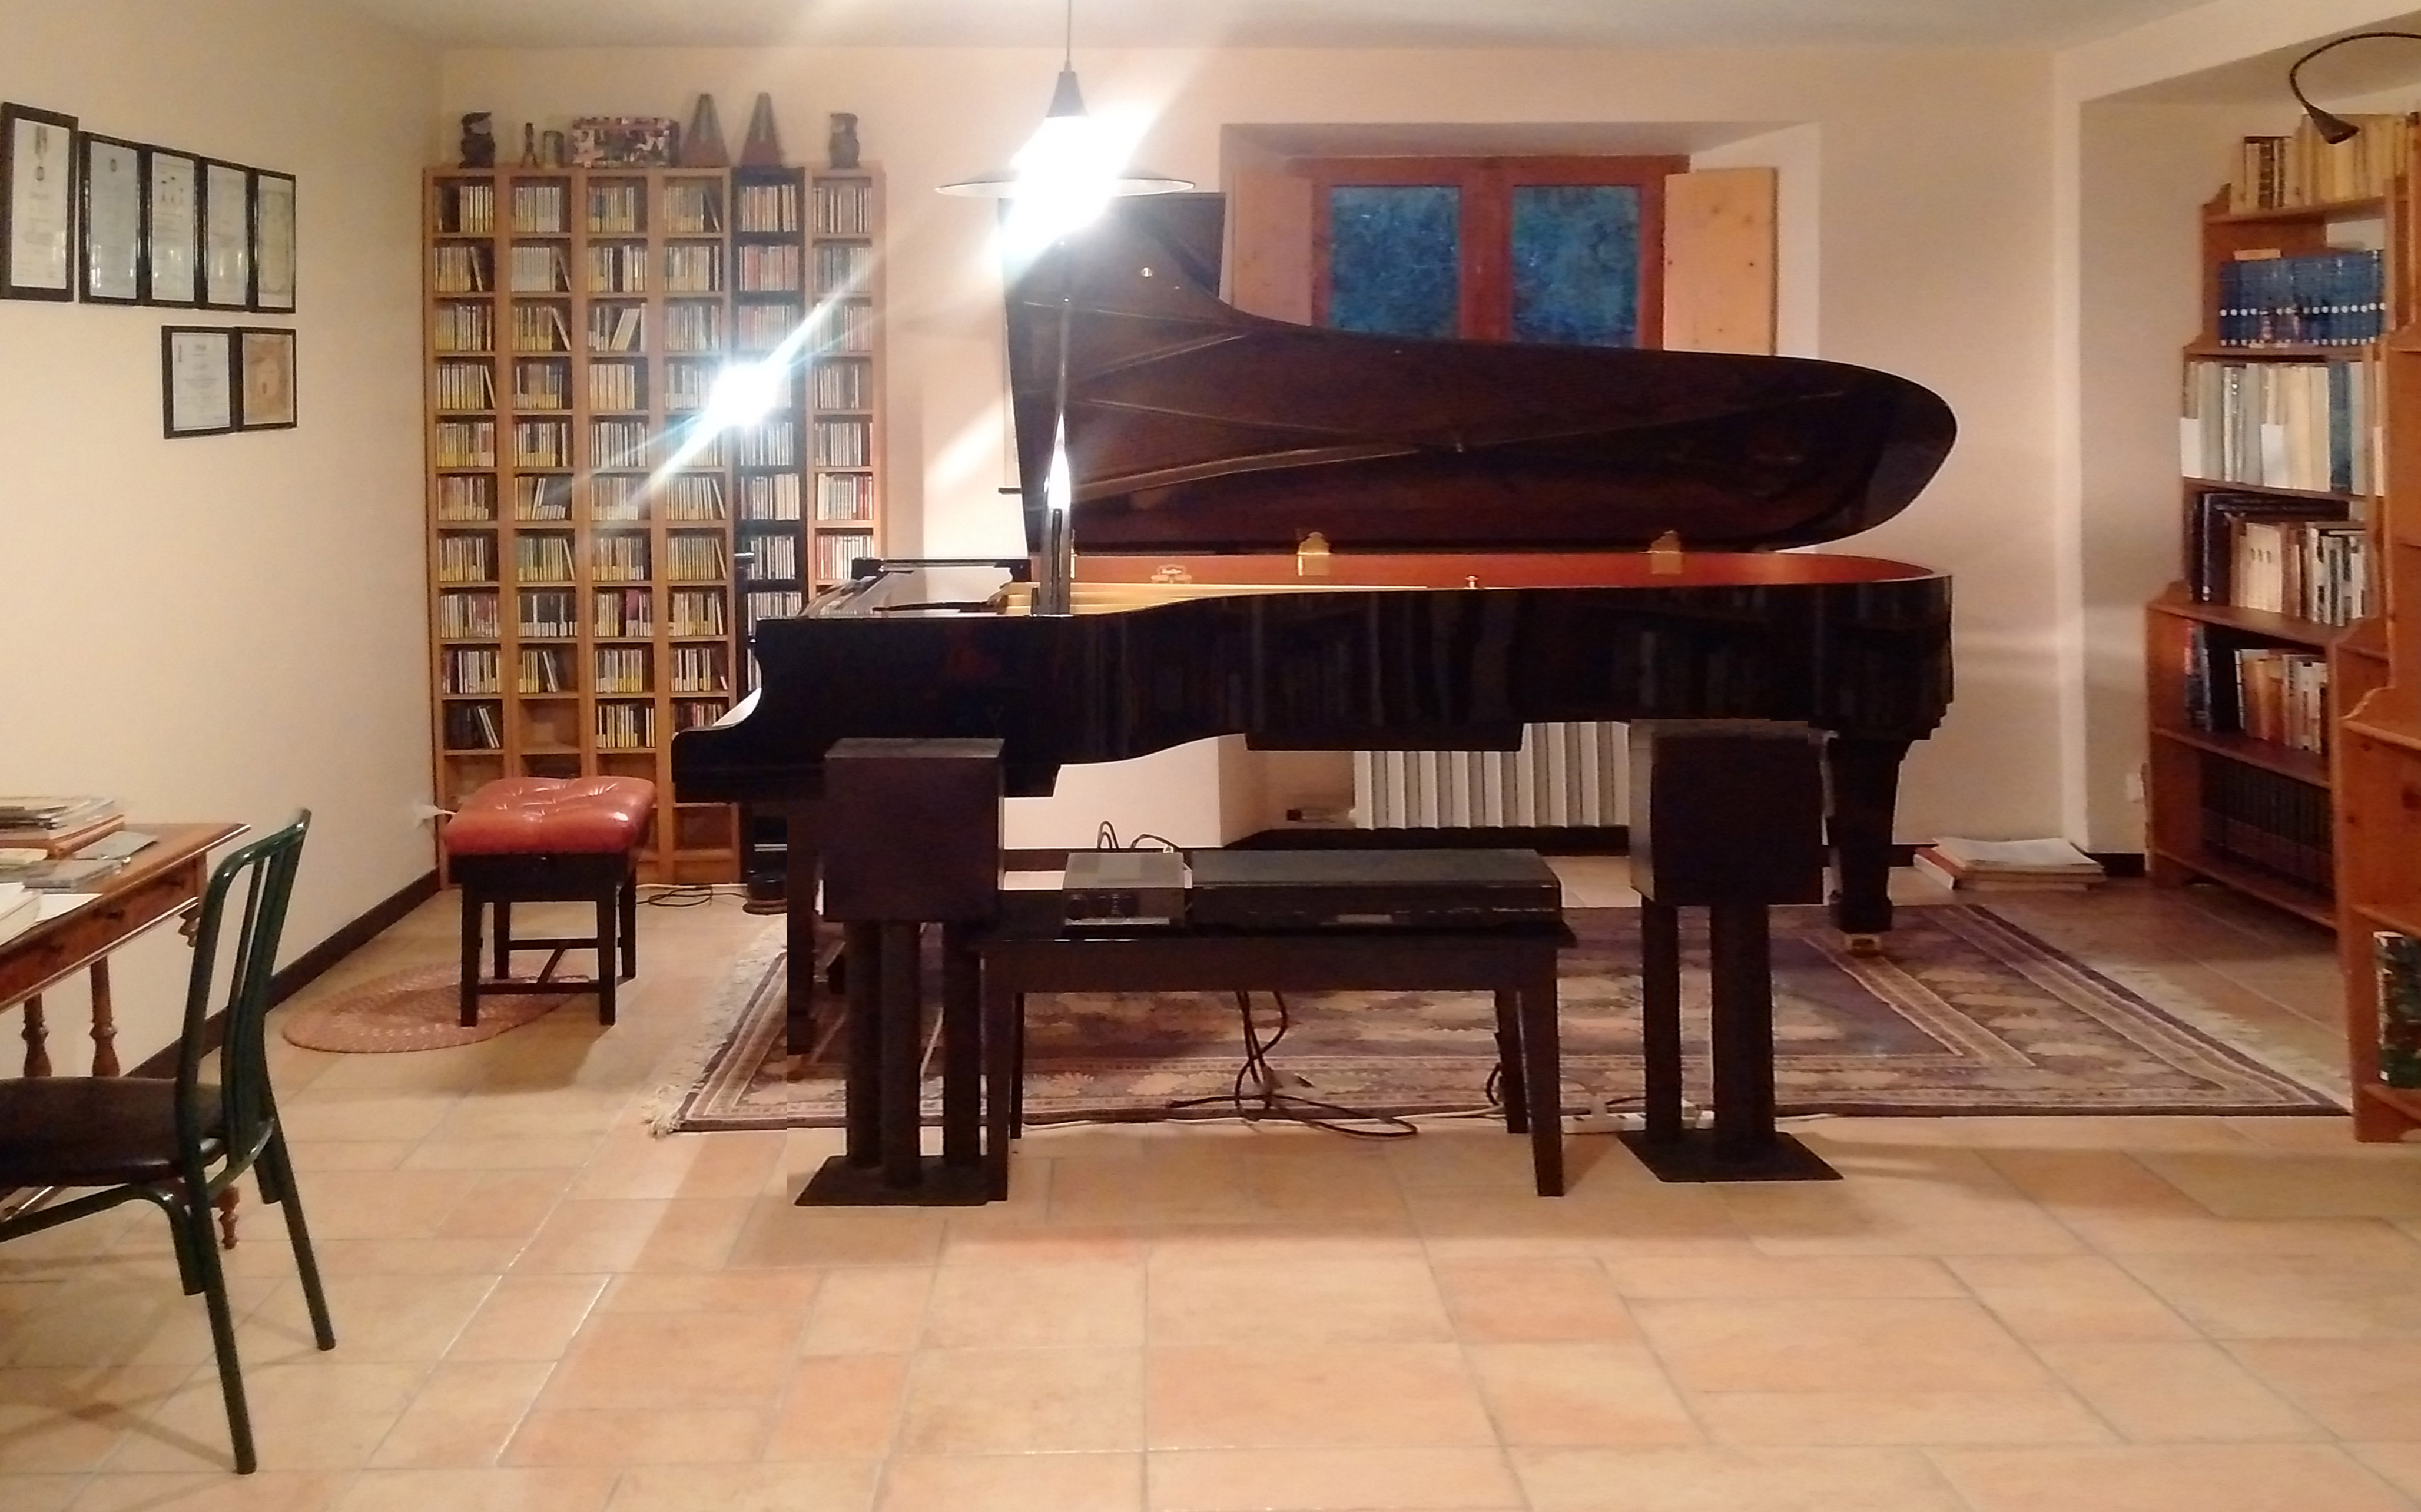 Music courses for amateur pianists Italy